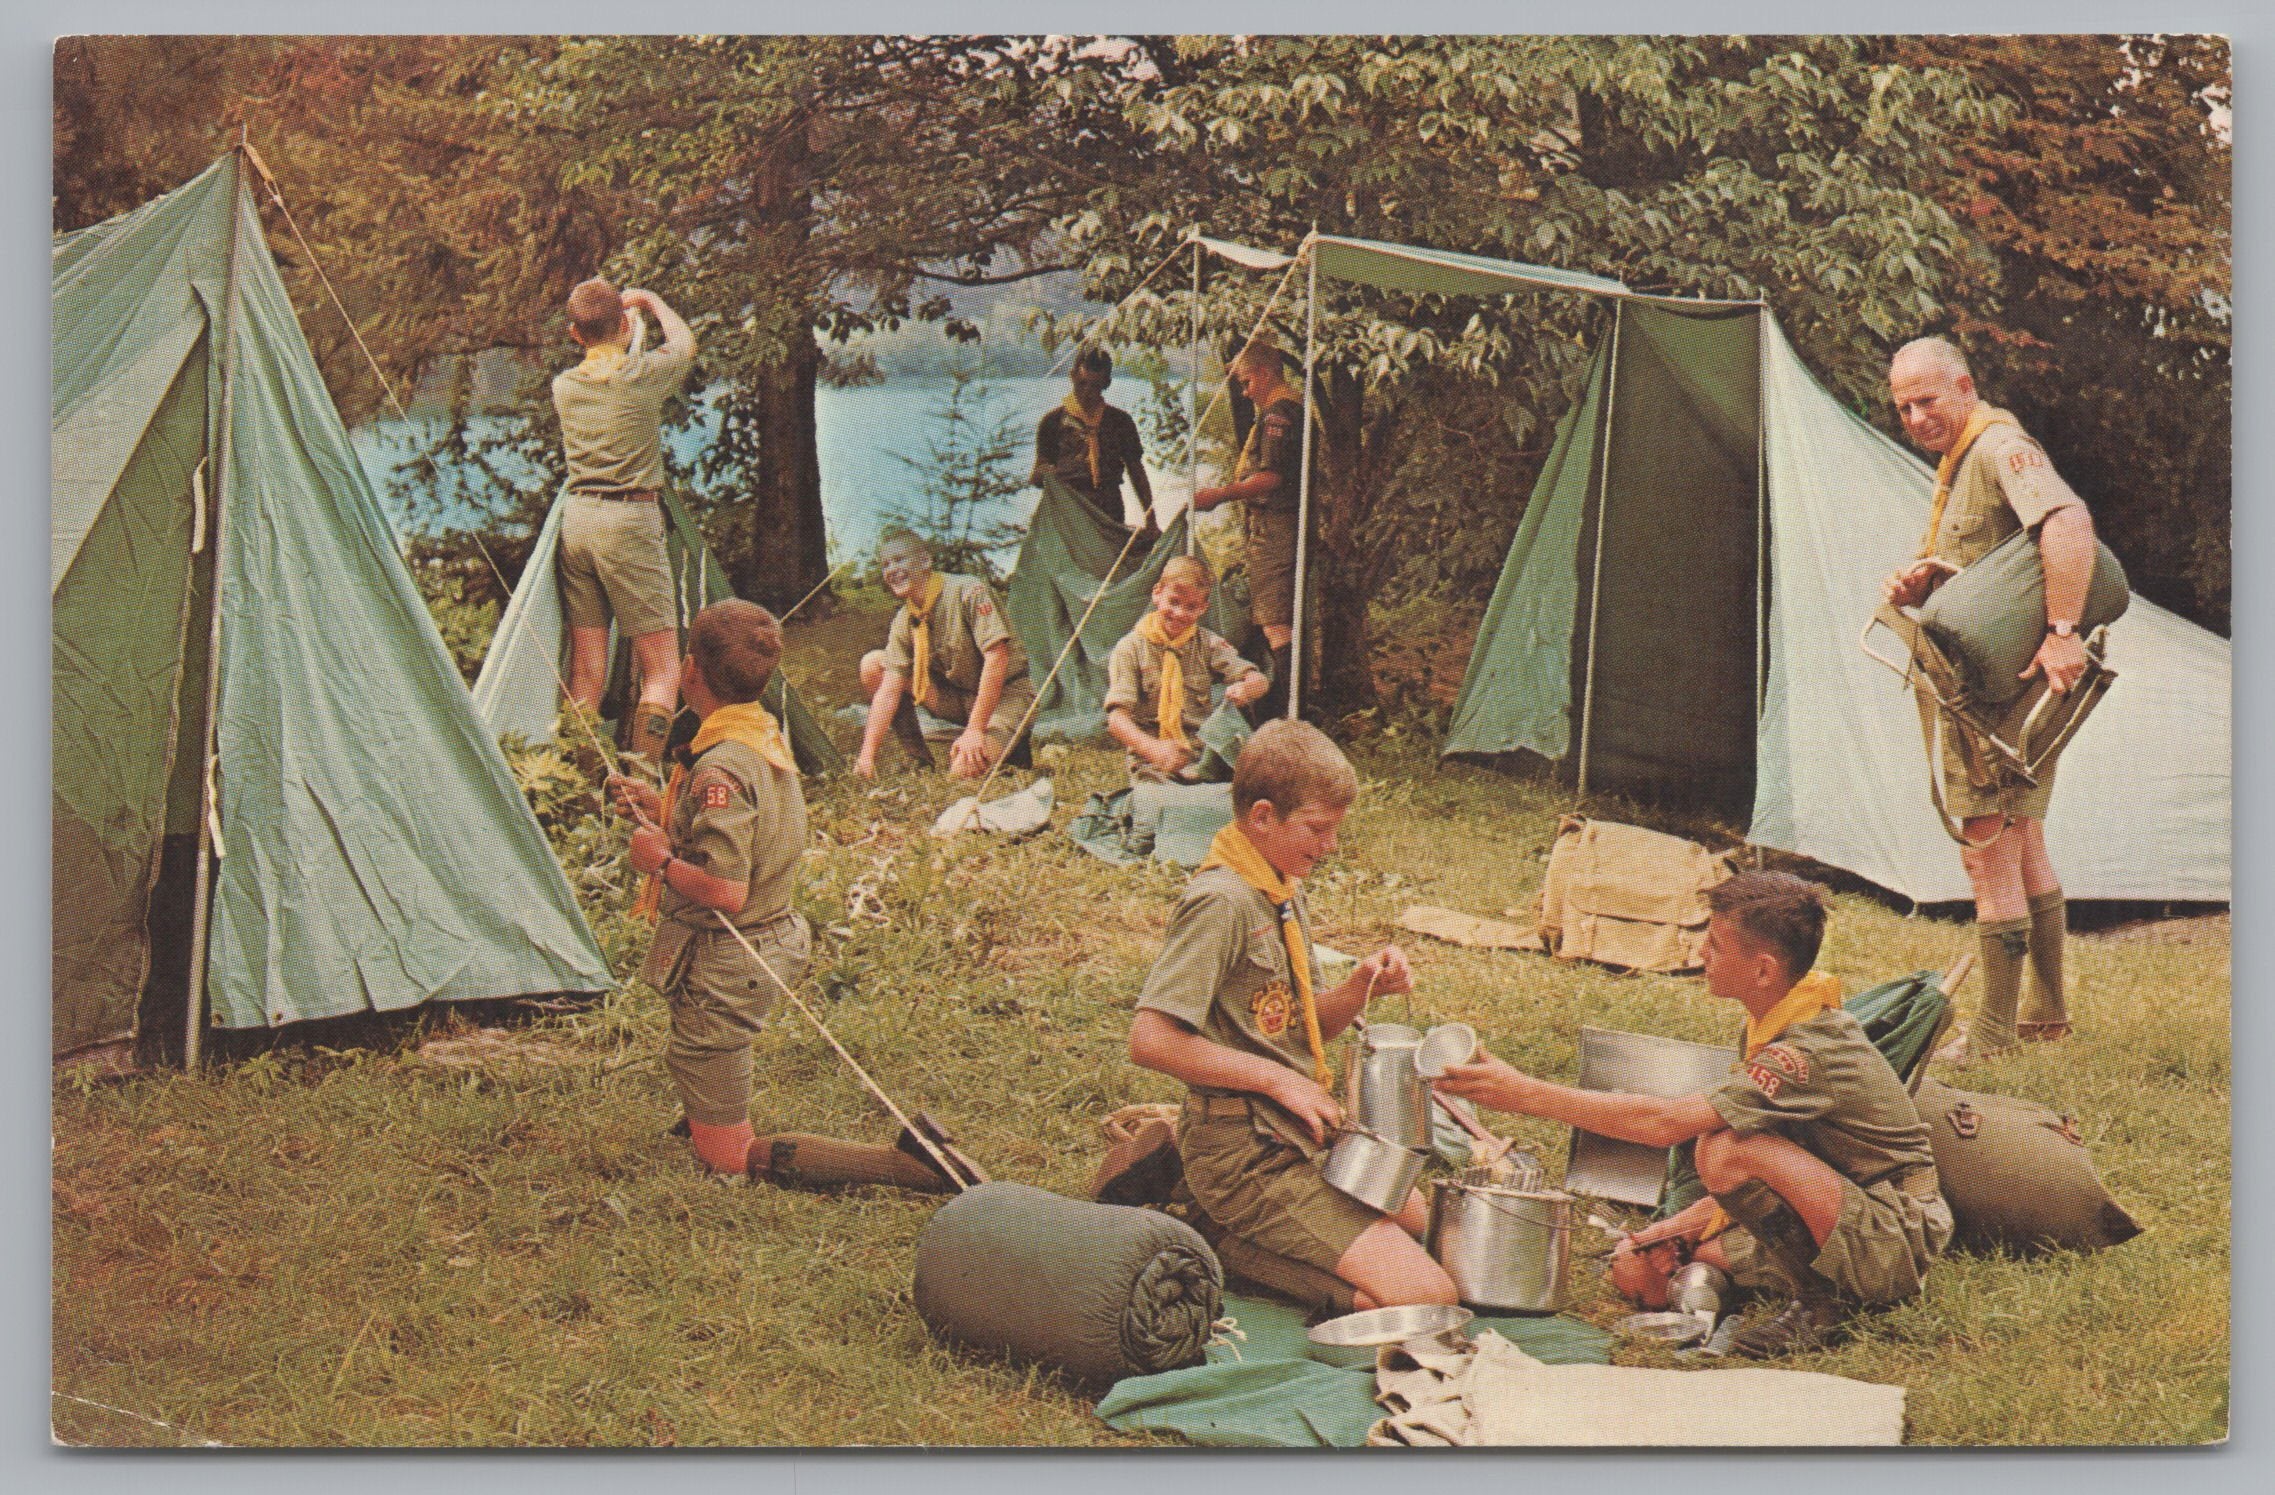 The Boy Scouts Of America, Camping Out In The Woods, Vintage Post Card